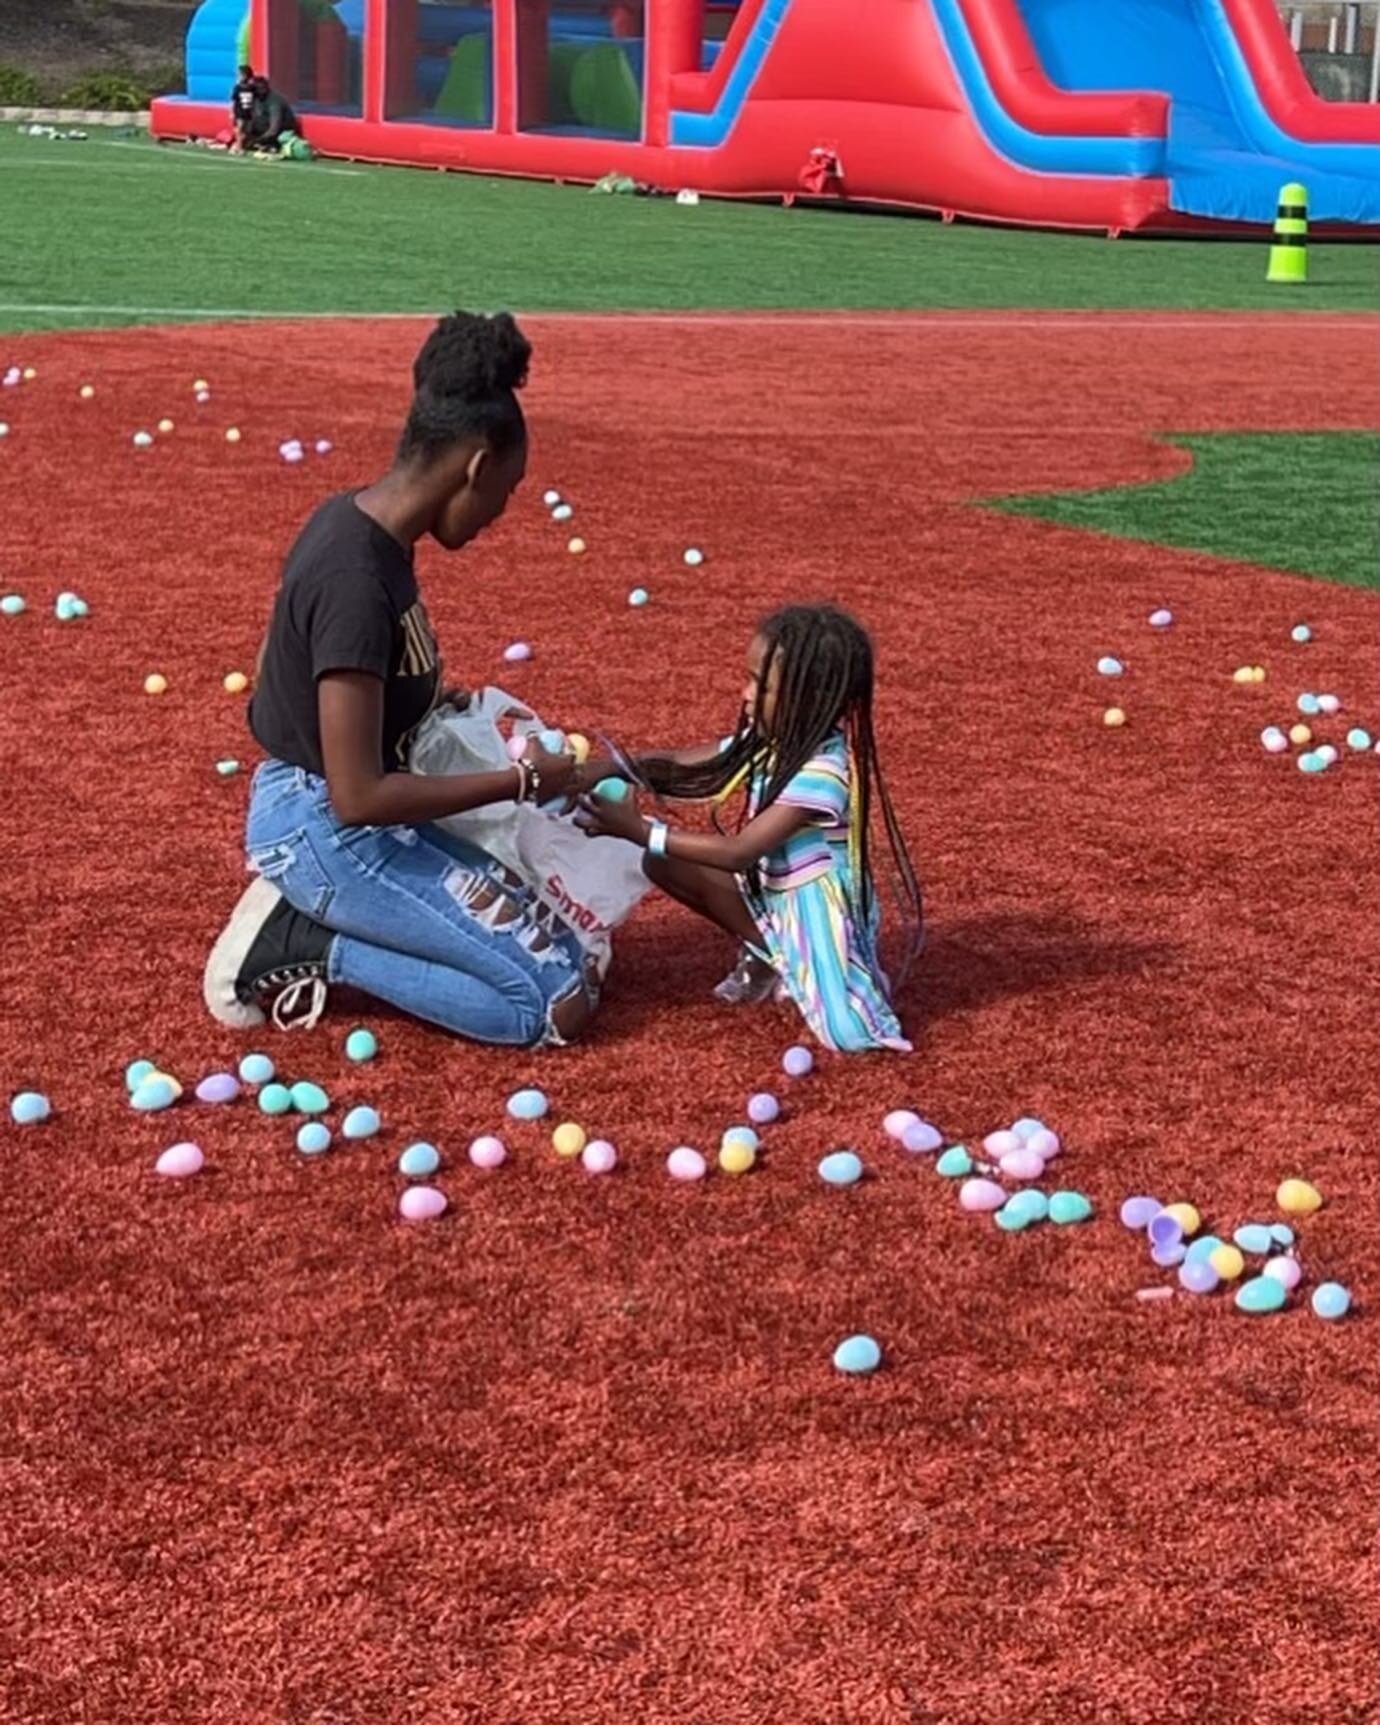 Happy Easter to you all but We would like to thank @jackierobinsonymca the brothers and sisters from Masonry @caliventure_party_rentals and most importantly the community for all coming together to make this happen for the kids. #CommunityAs1